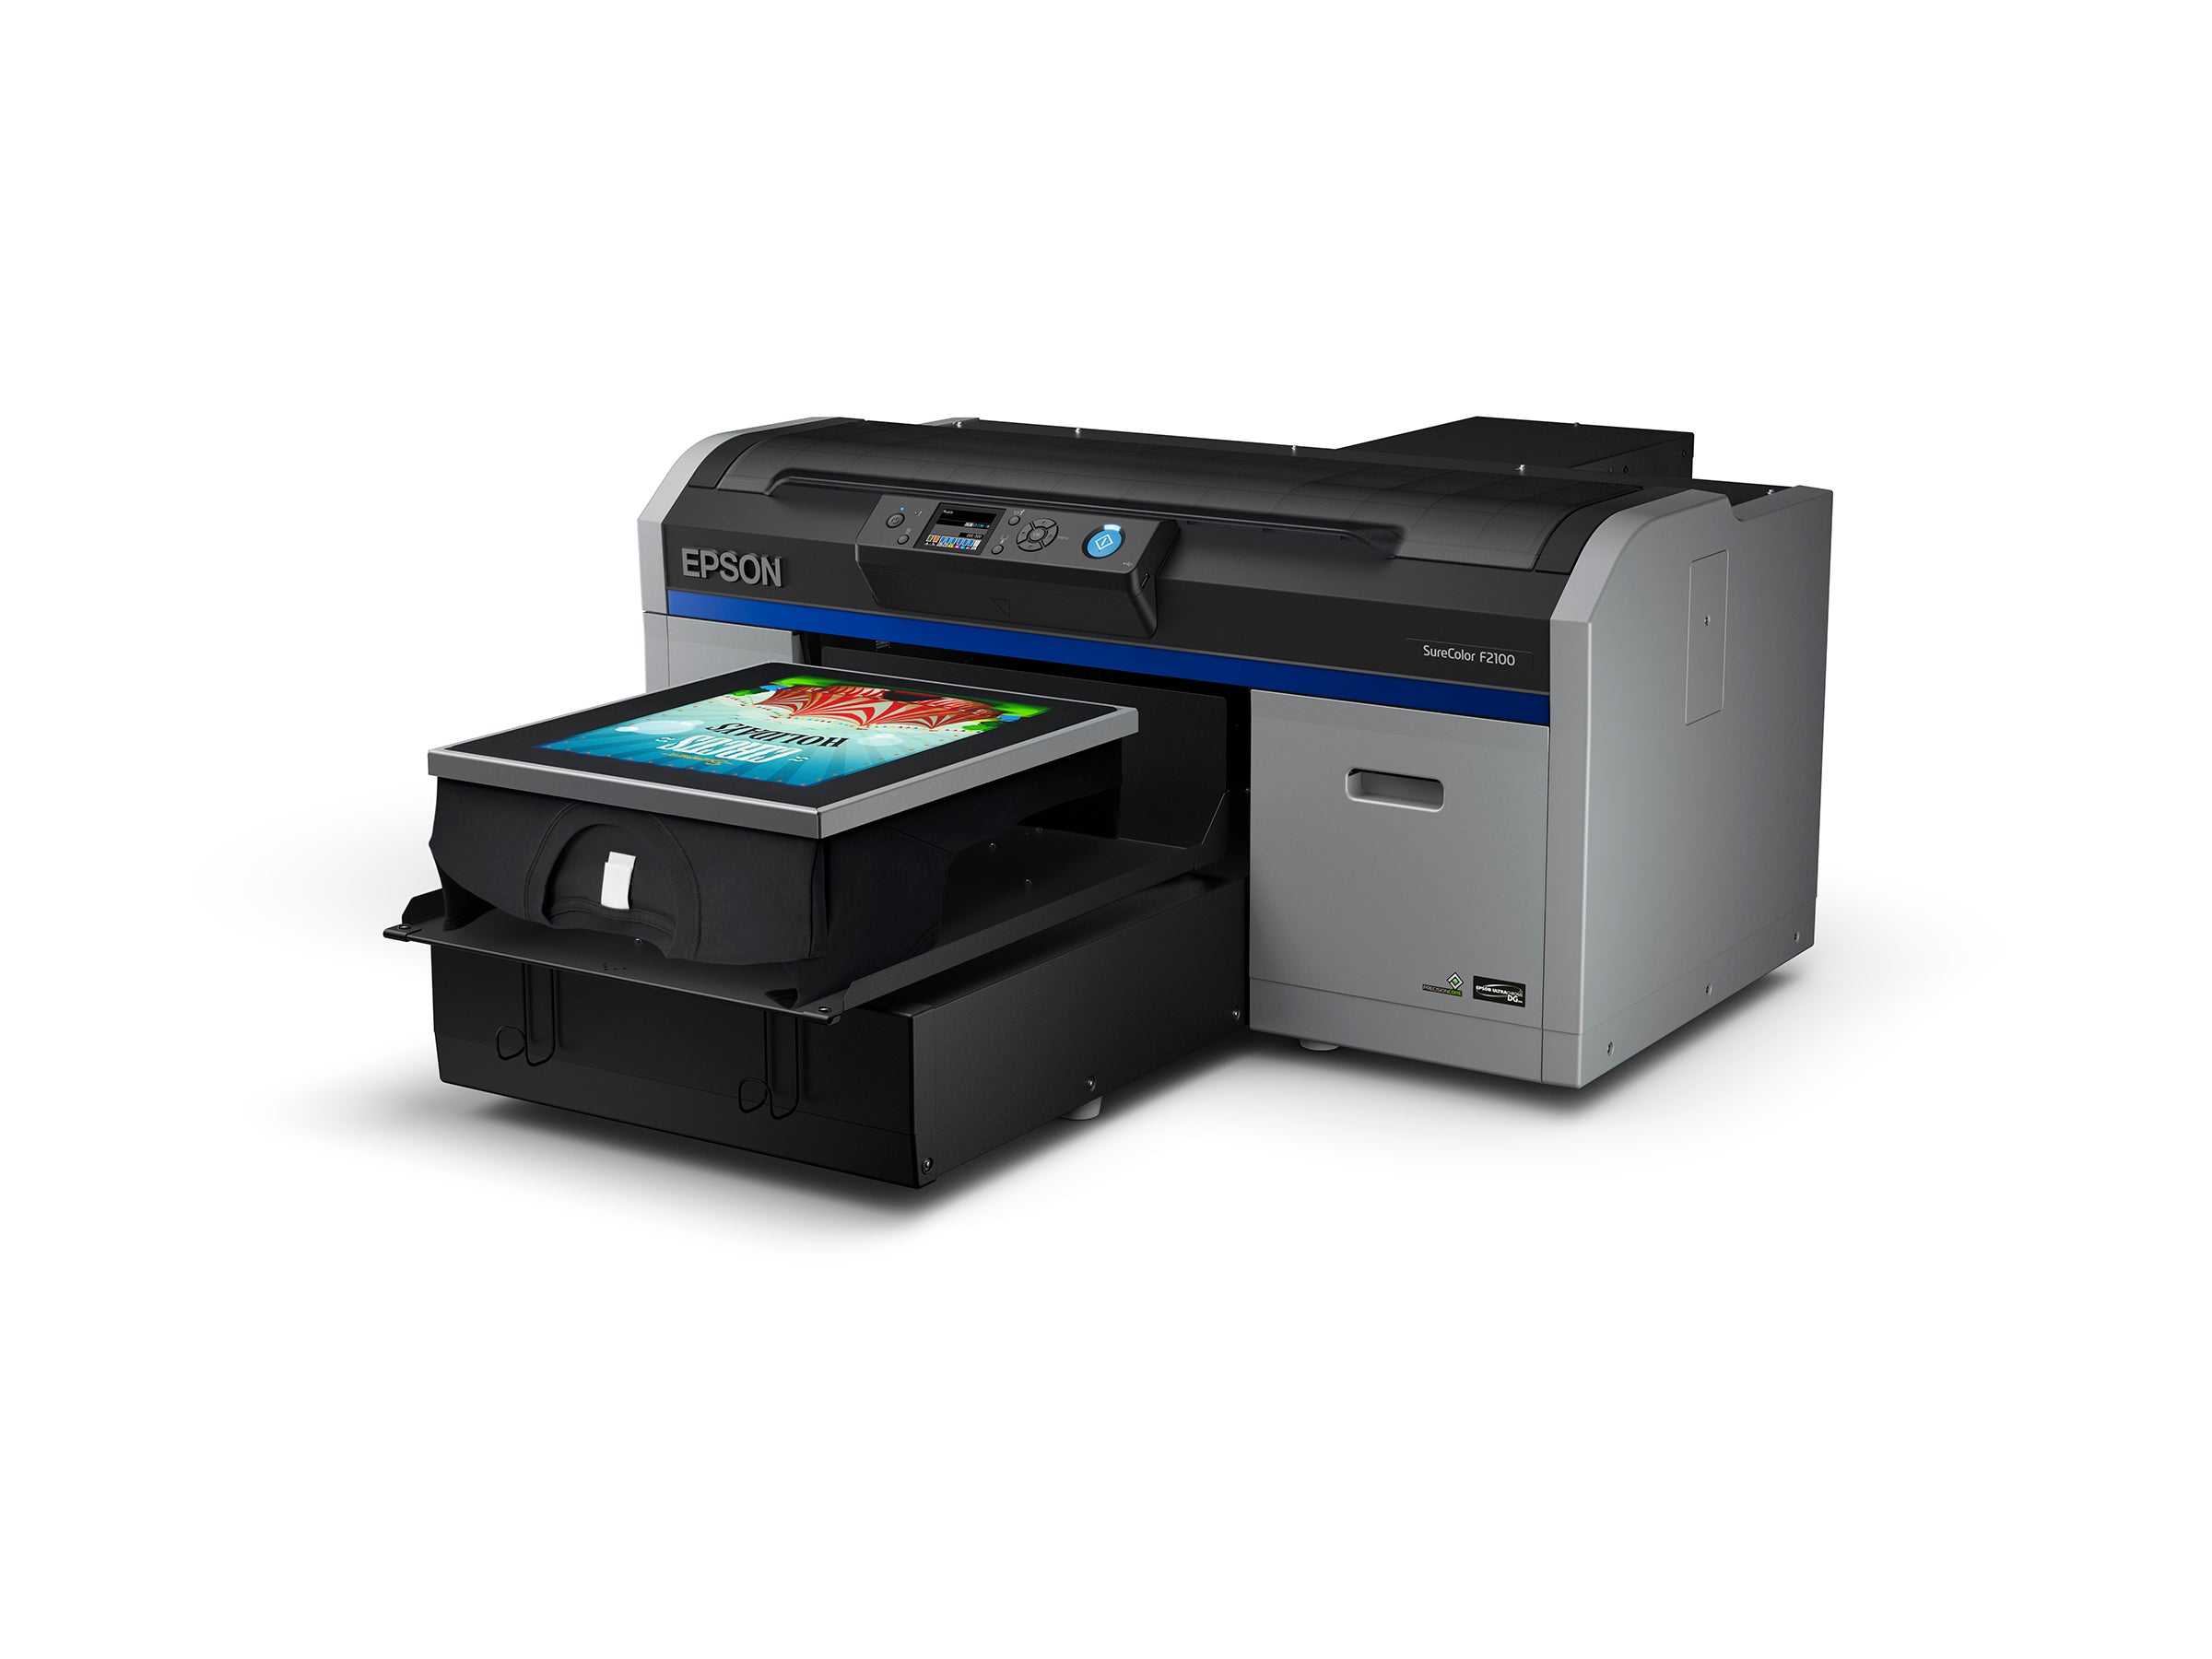 epson f2100 printer with black t shirt on platen angled